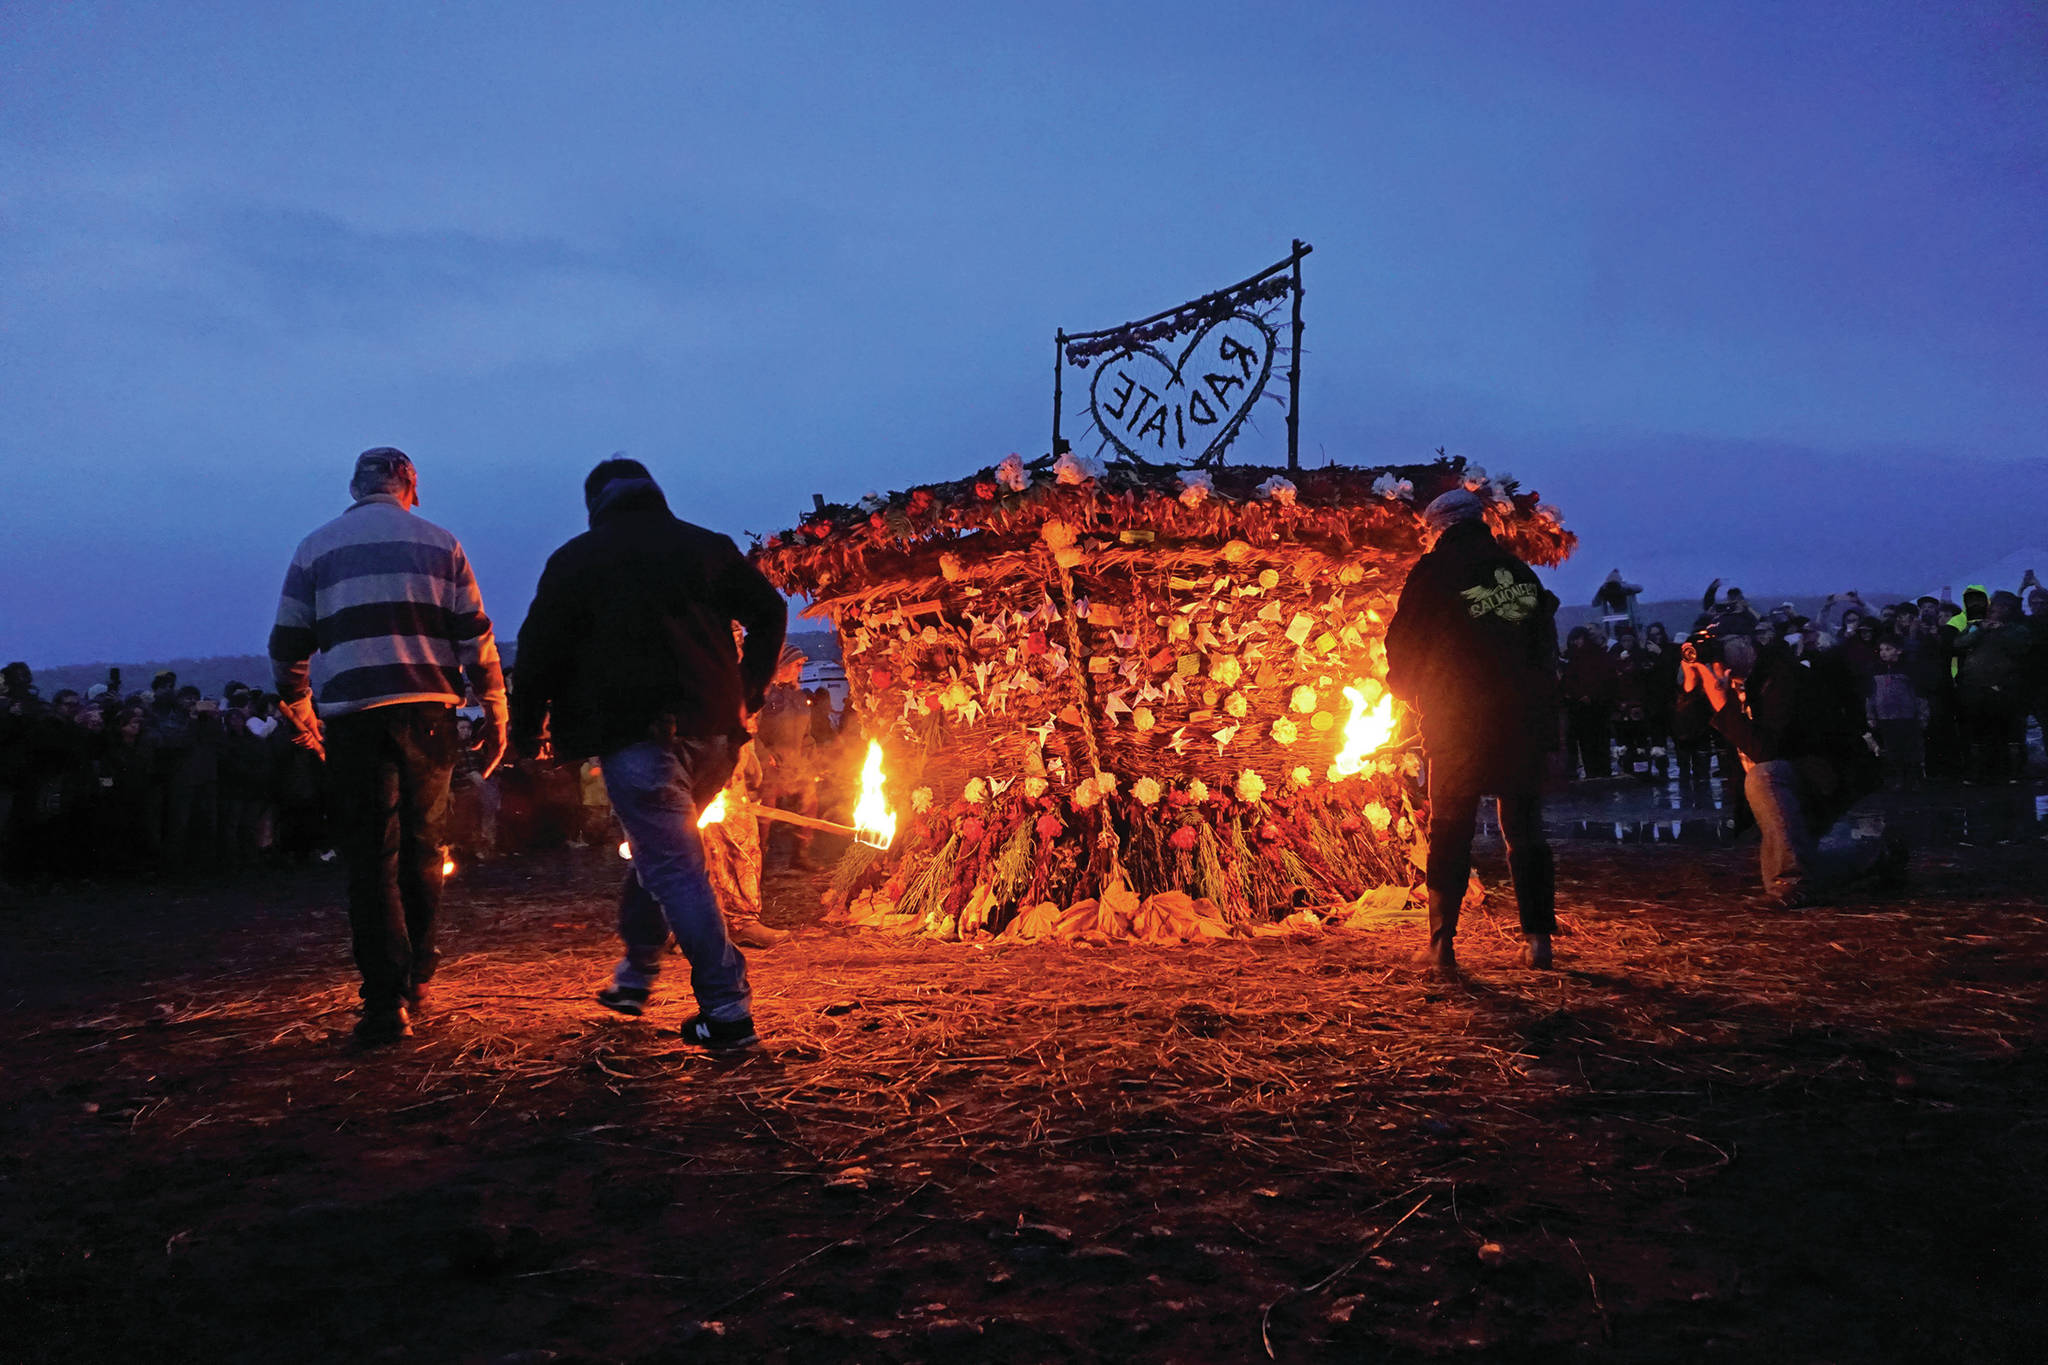 Torch bearers prepare to ignite”Radiate,” the 16th annual Burning Basket, on Sunday night, Sept. 15, 2019, at Mariner Park on the Homer Spit in Homer, Alaska. (Photo by Michael Armstrong/Homer News)